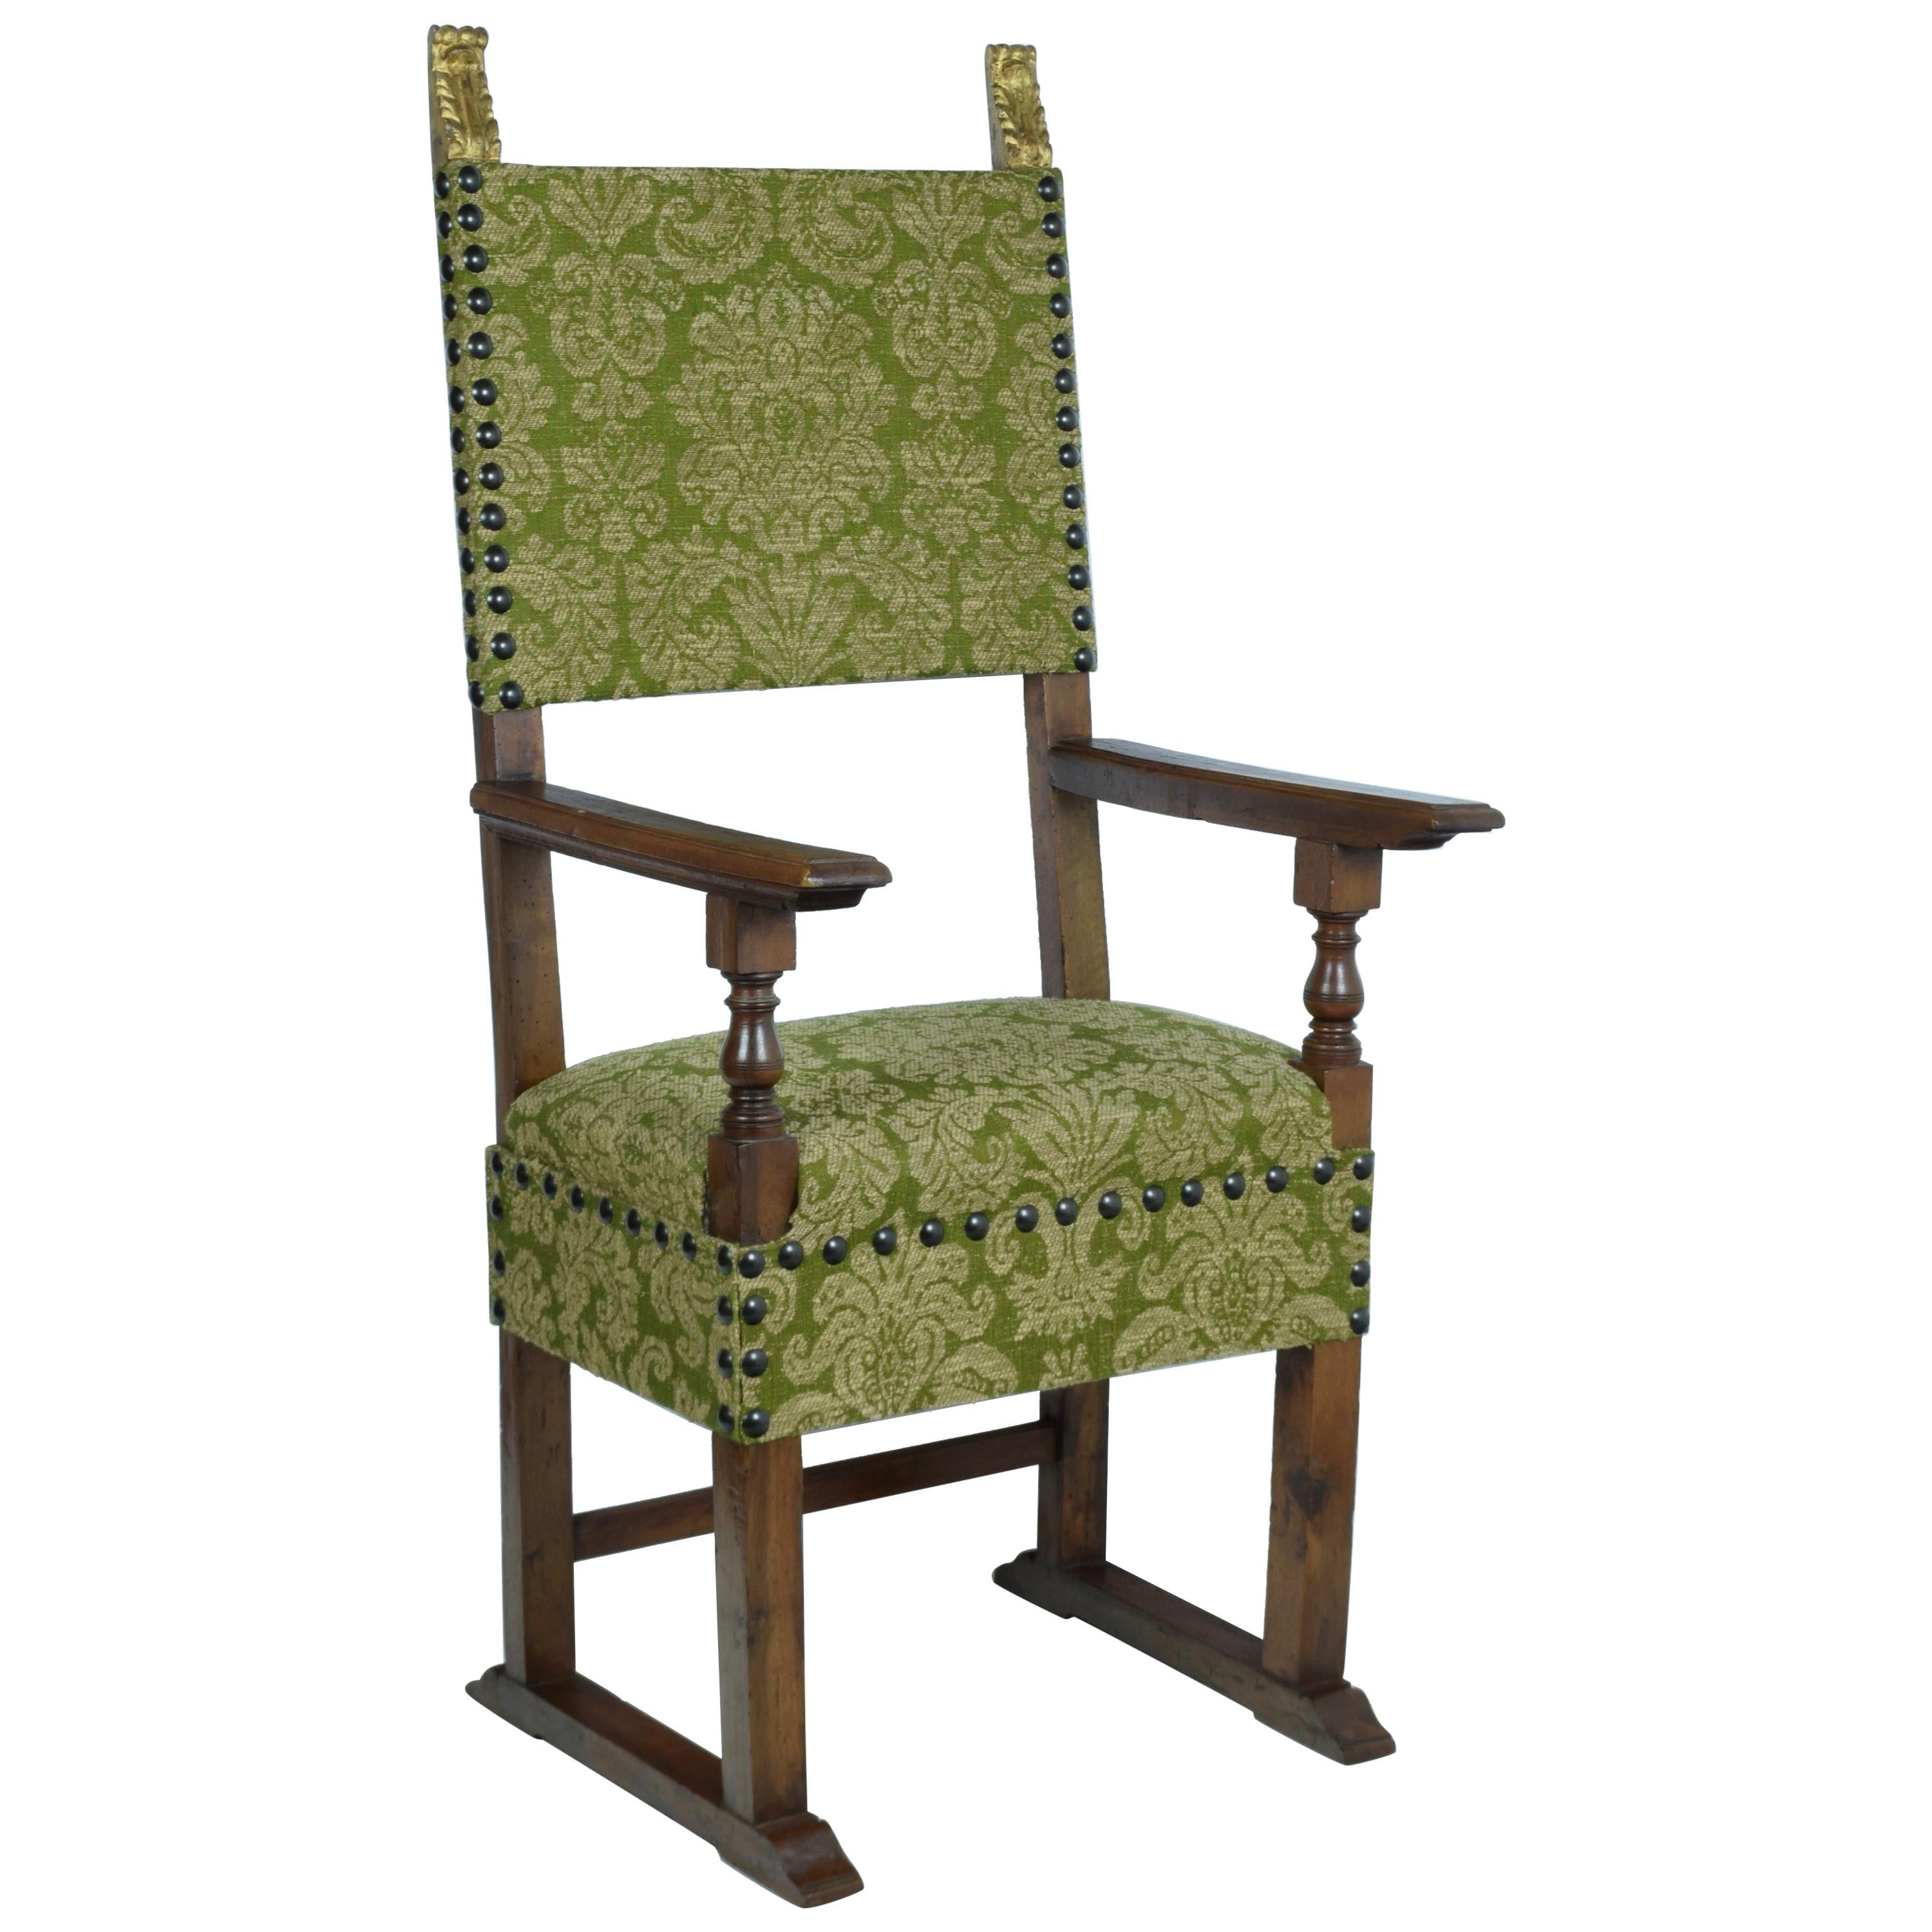 Italian Armchair in Carved Walnut Late 16th Century Covered in Green Damask